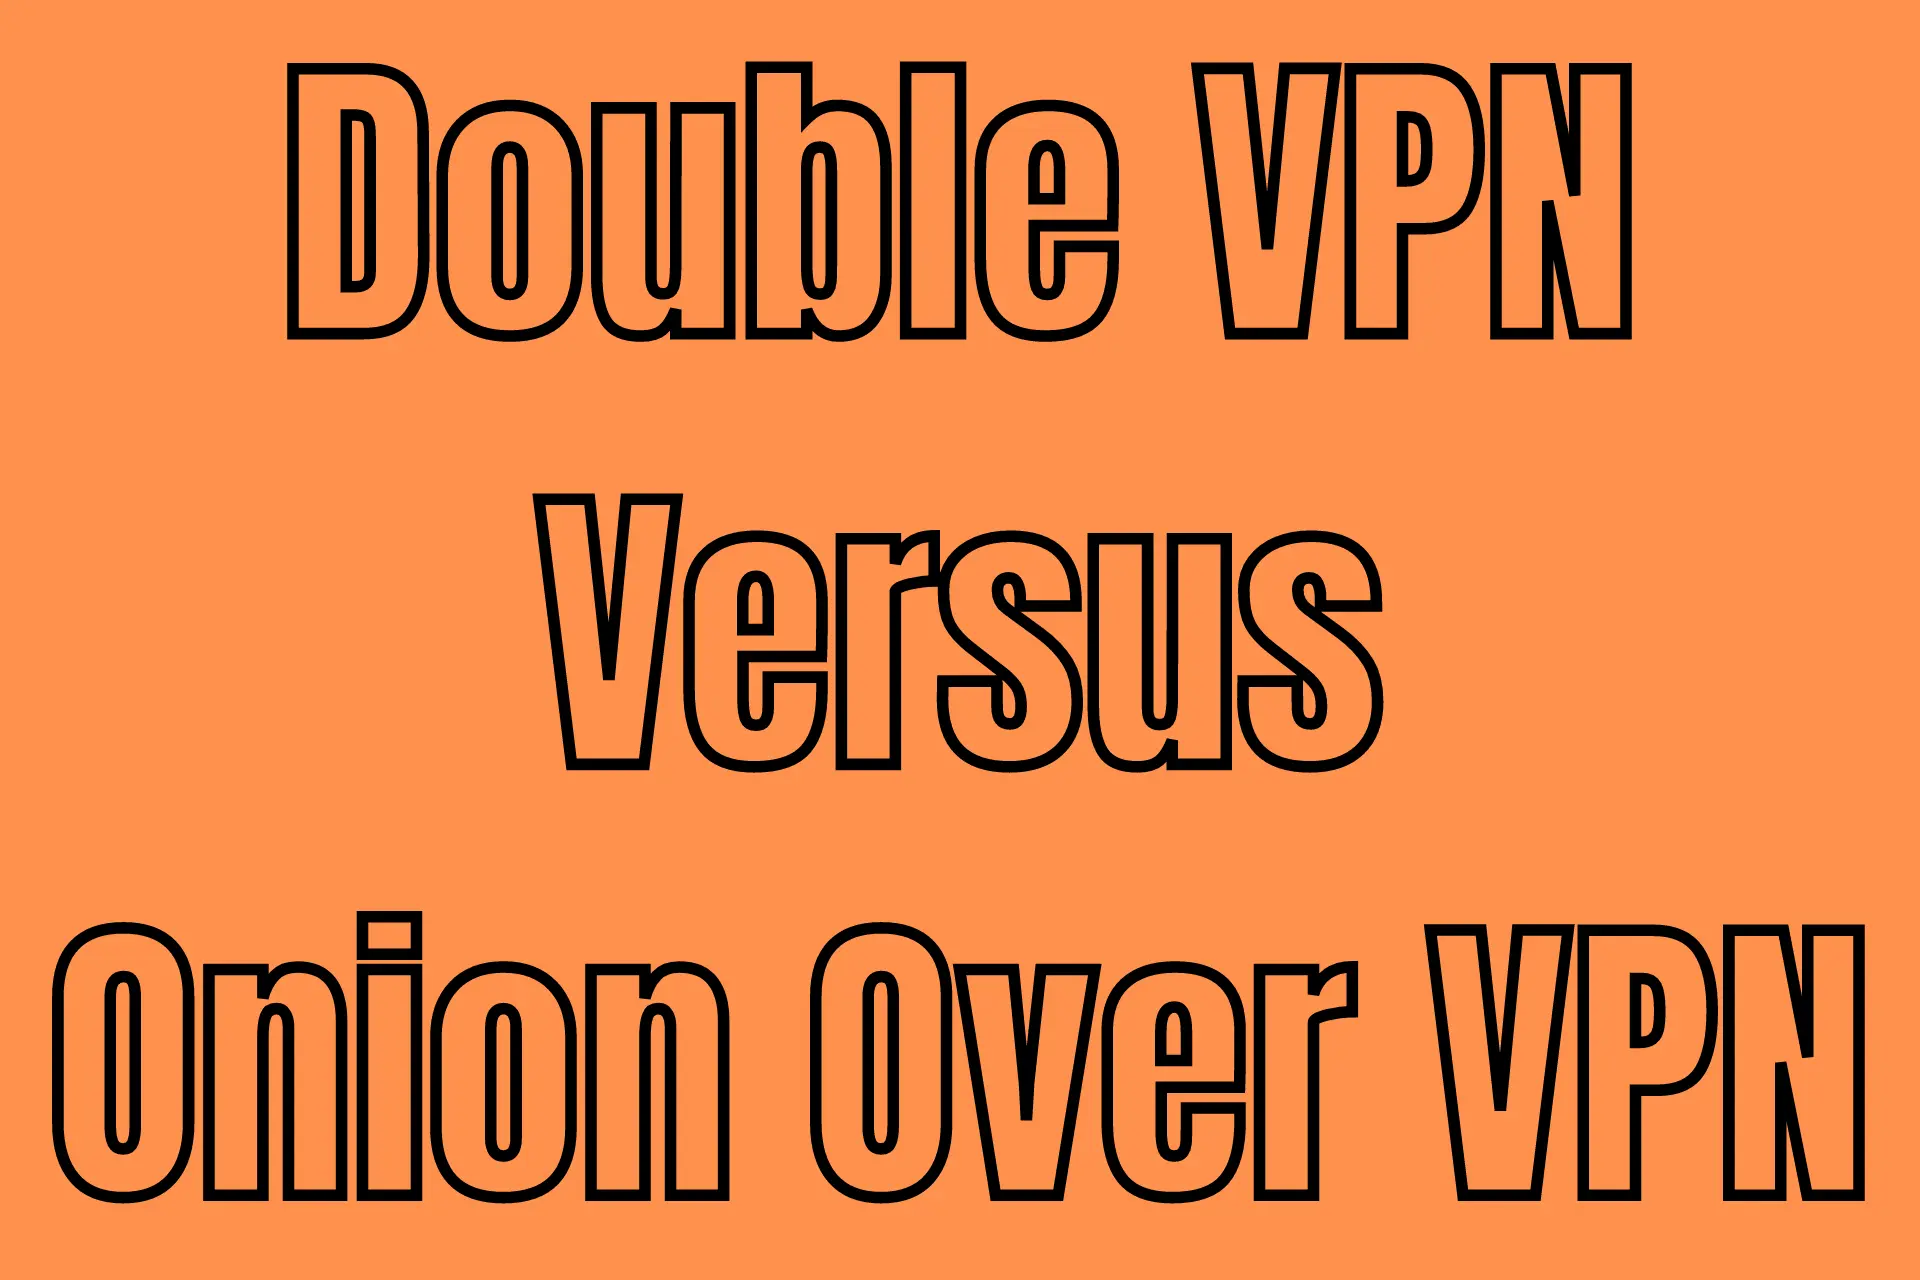 Double VPN Versus Onion Over VPN: Which One to Use?